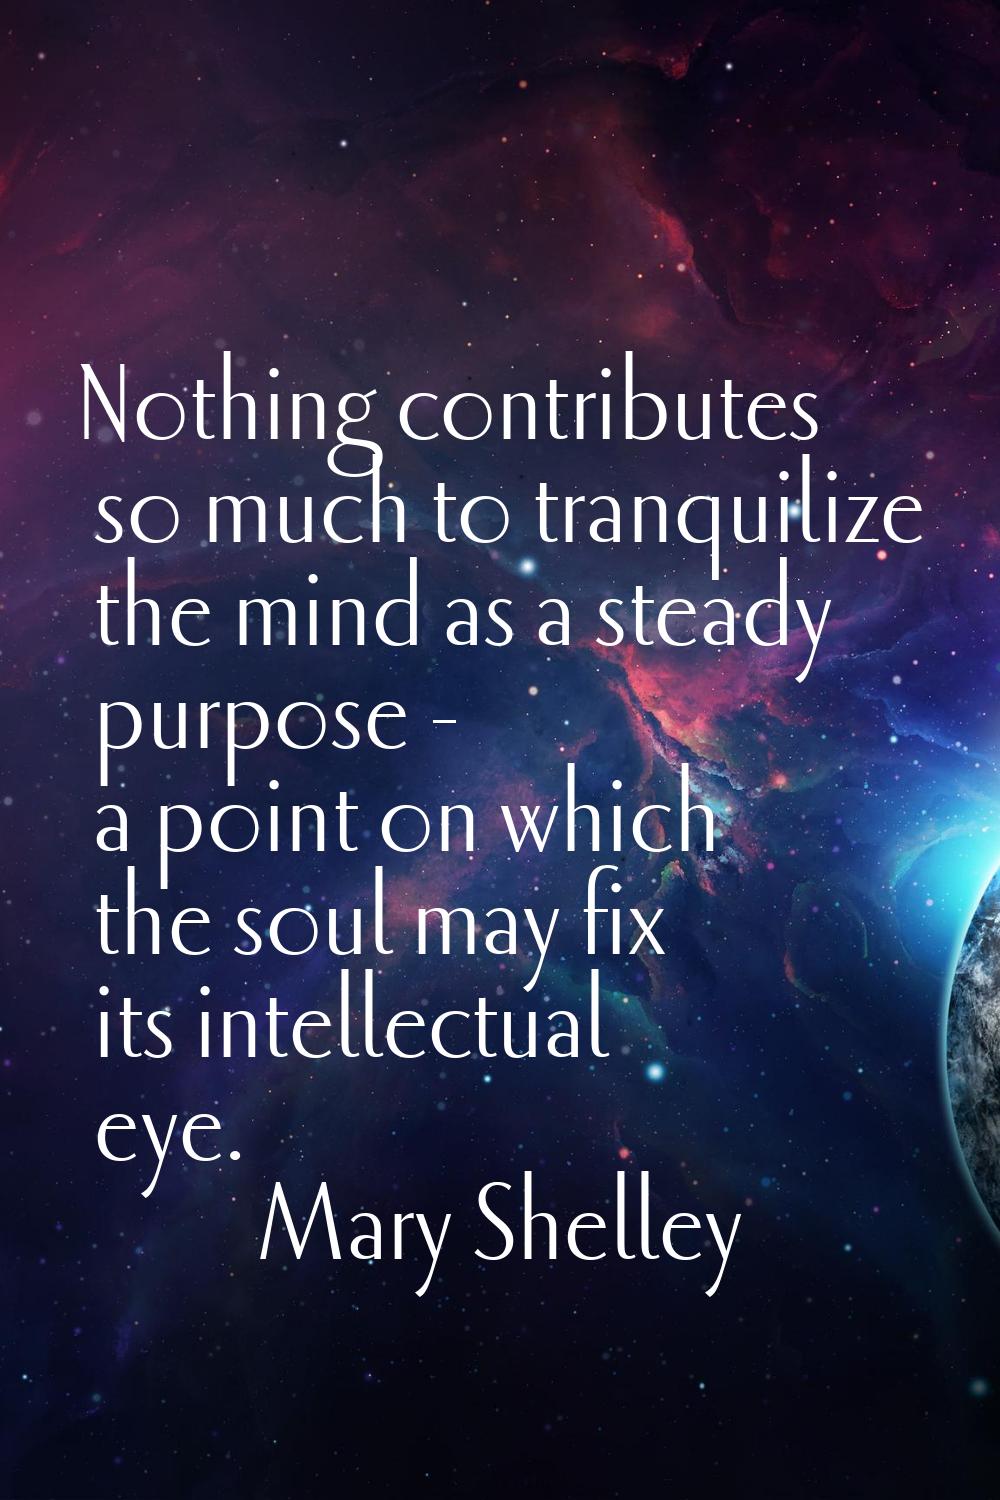 Nothing contributes so much to tranquilize the mind as a steady purpose - a point on which the soul